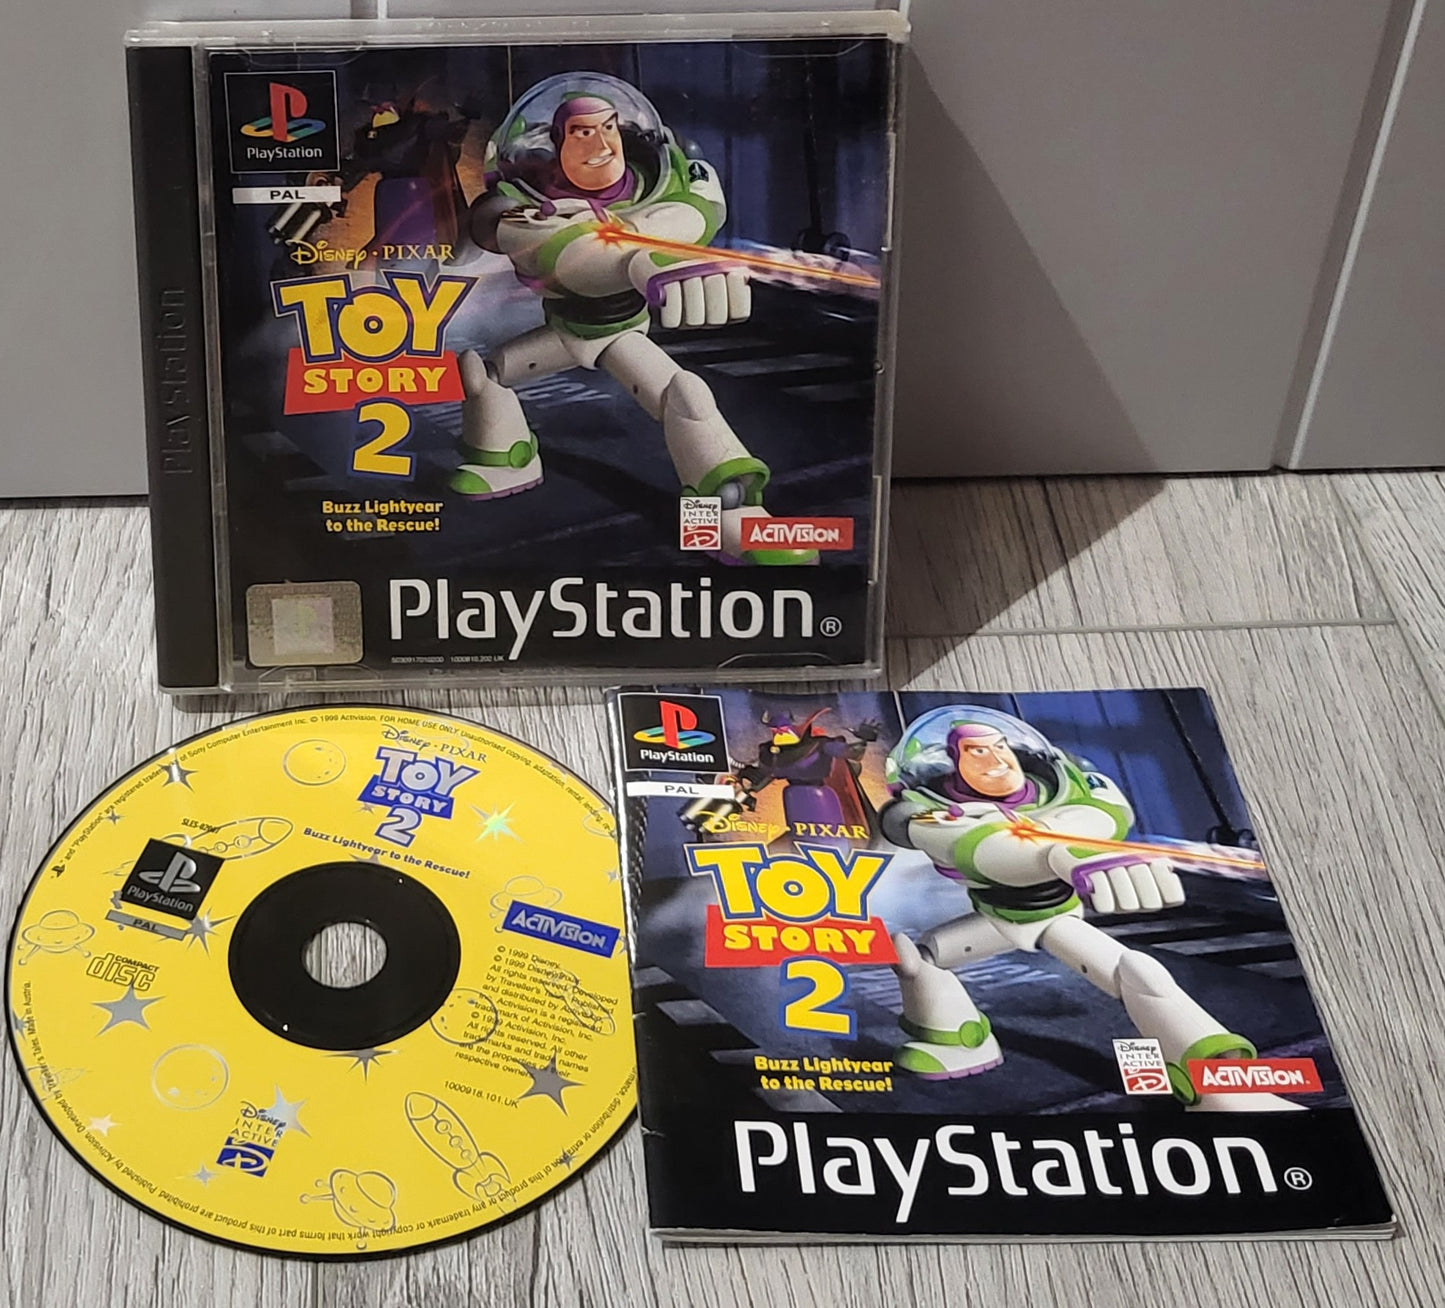 Toy Story 2 Buzz Lightyear to the Rescue Black Label Sony Playstation 1 (PS1) Game